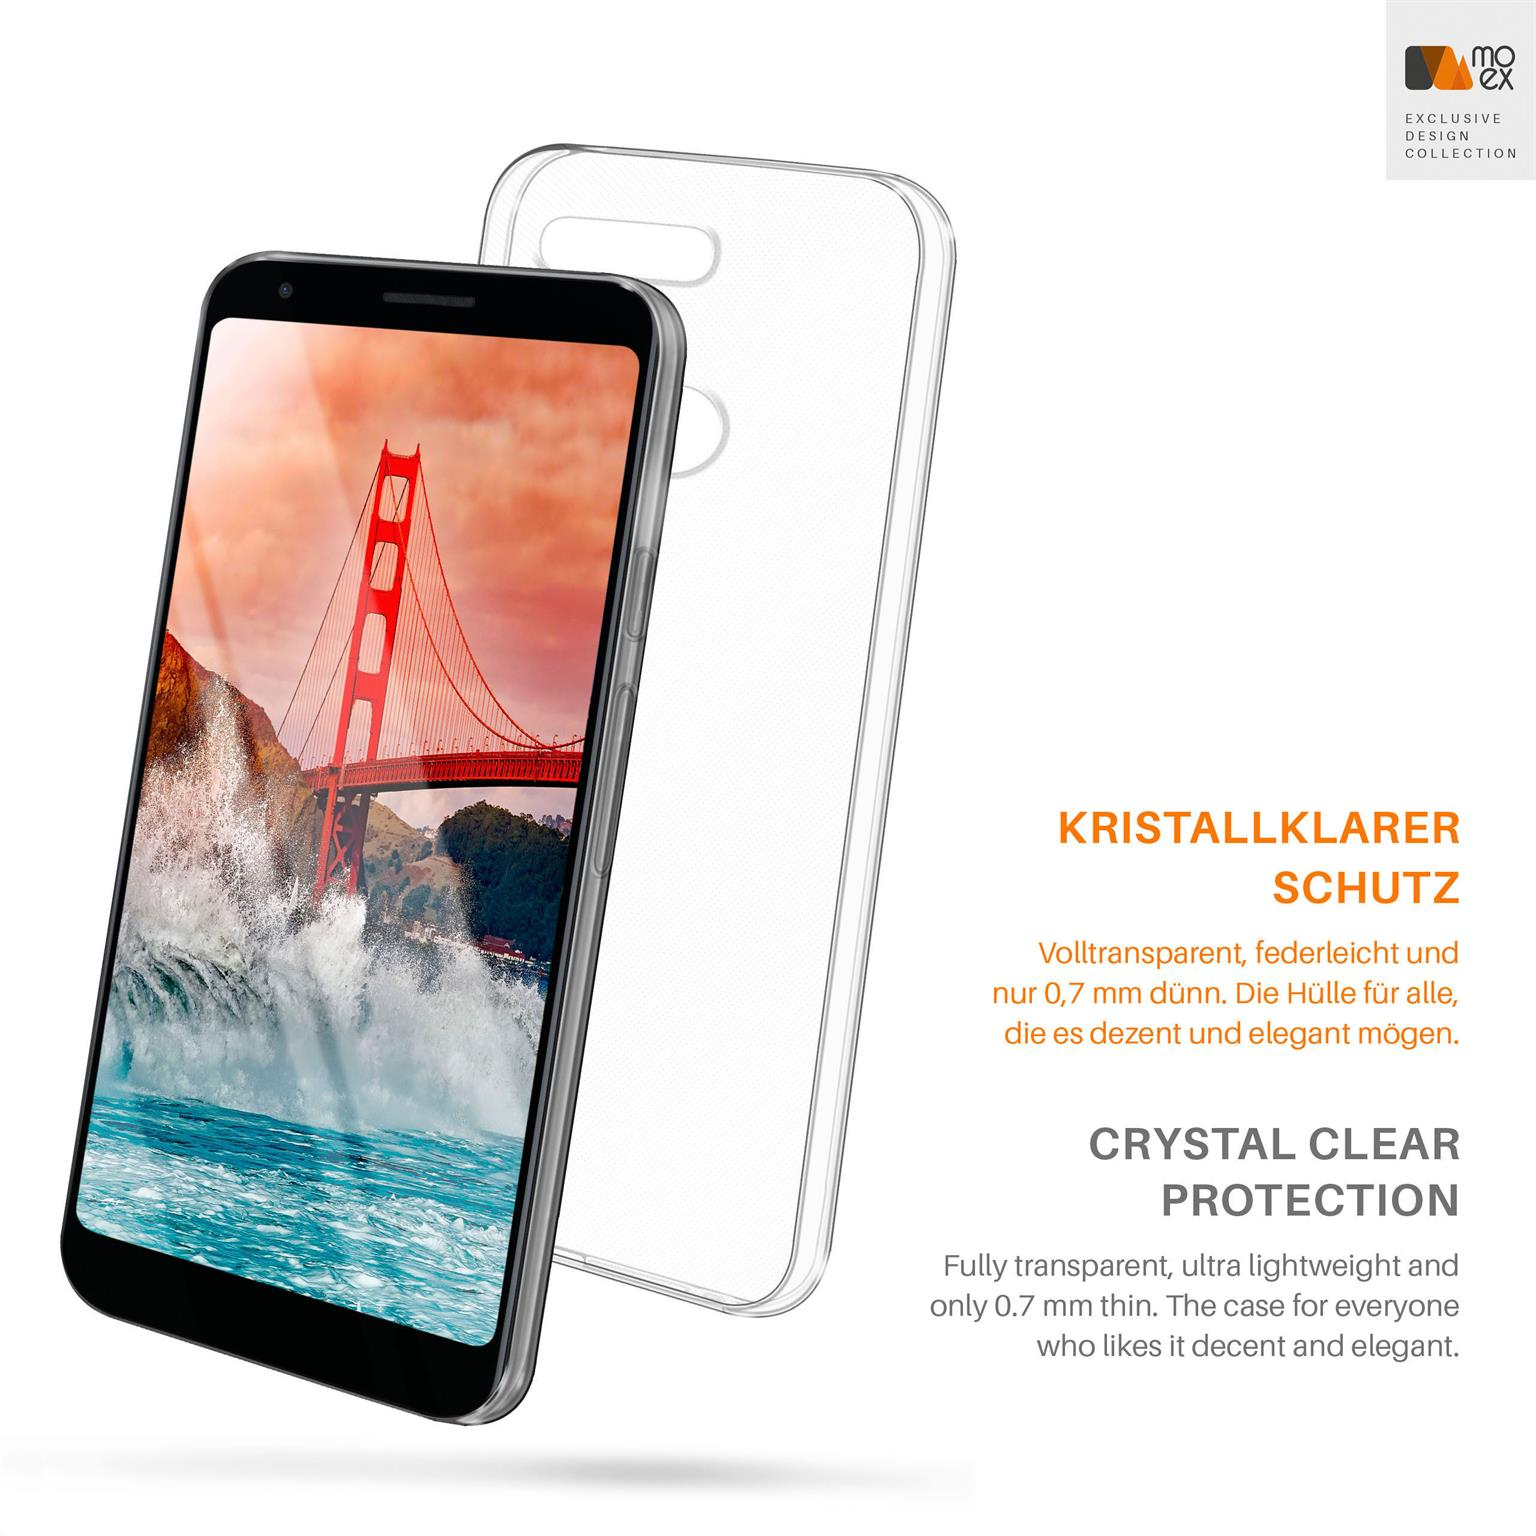 MOEX Aero Case, Backcover, 3a, Crystal-Clear Google, Pixel